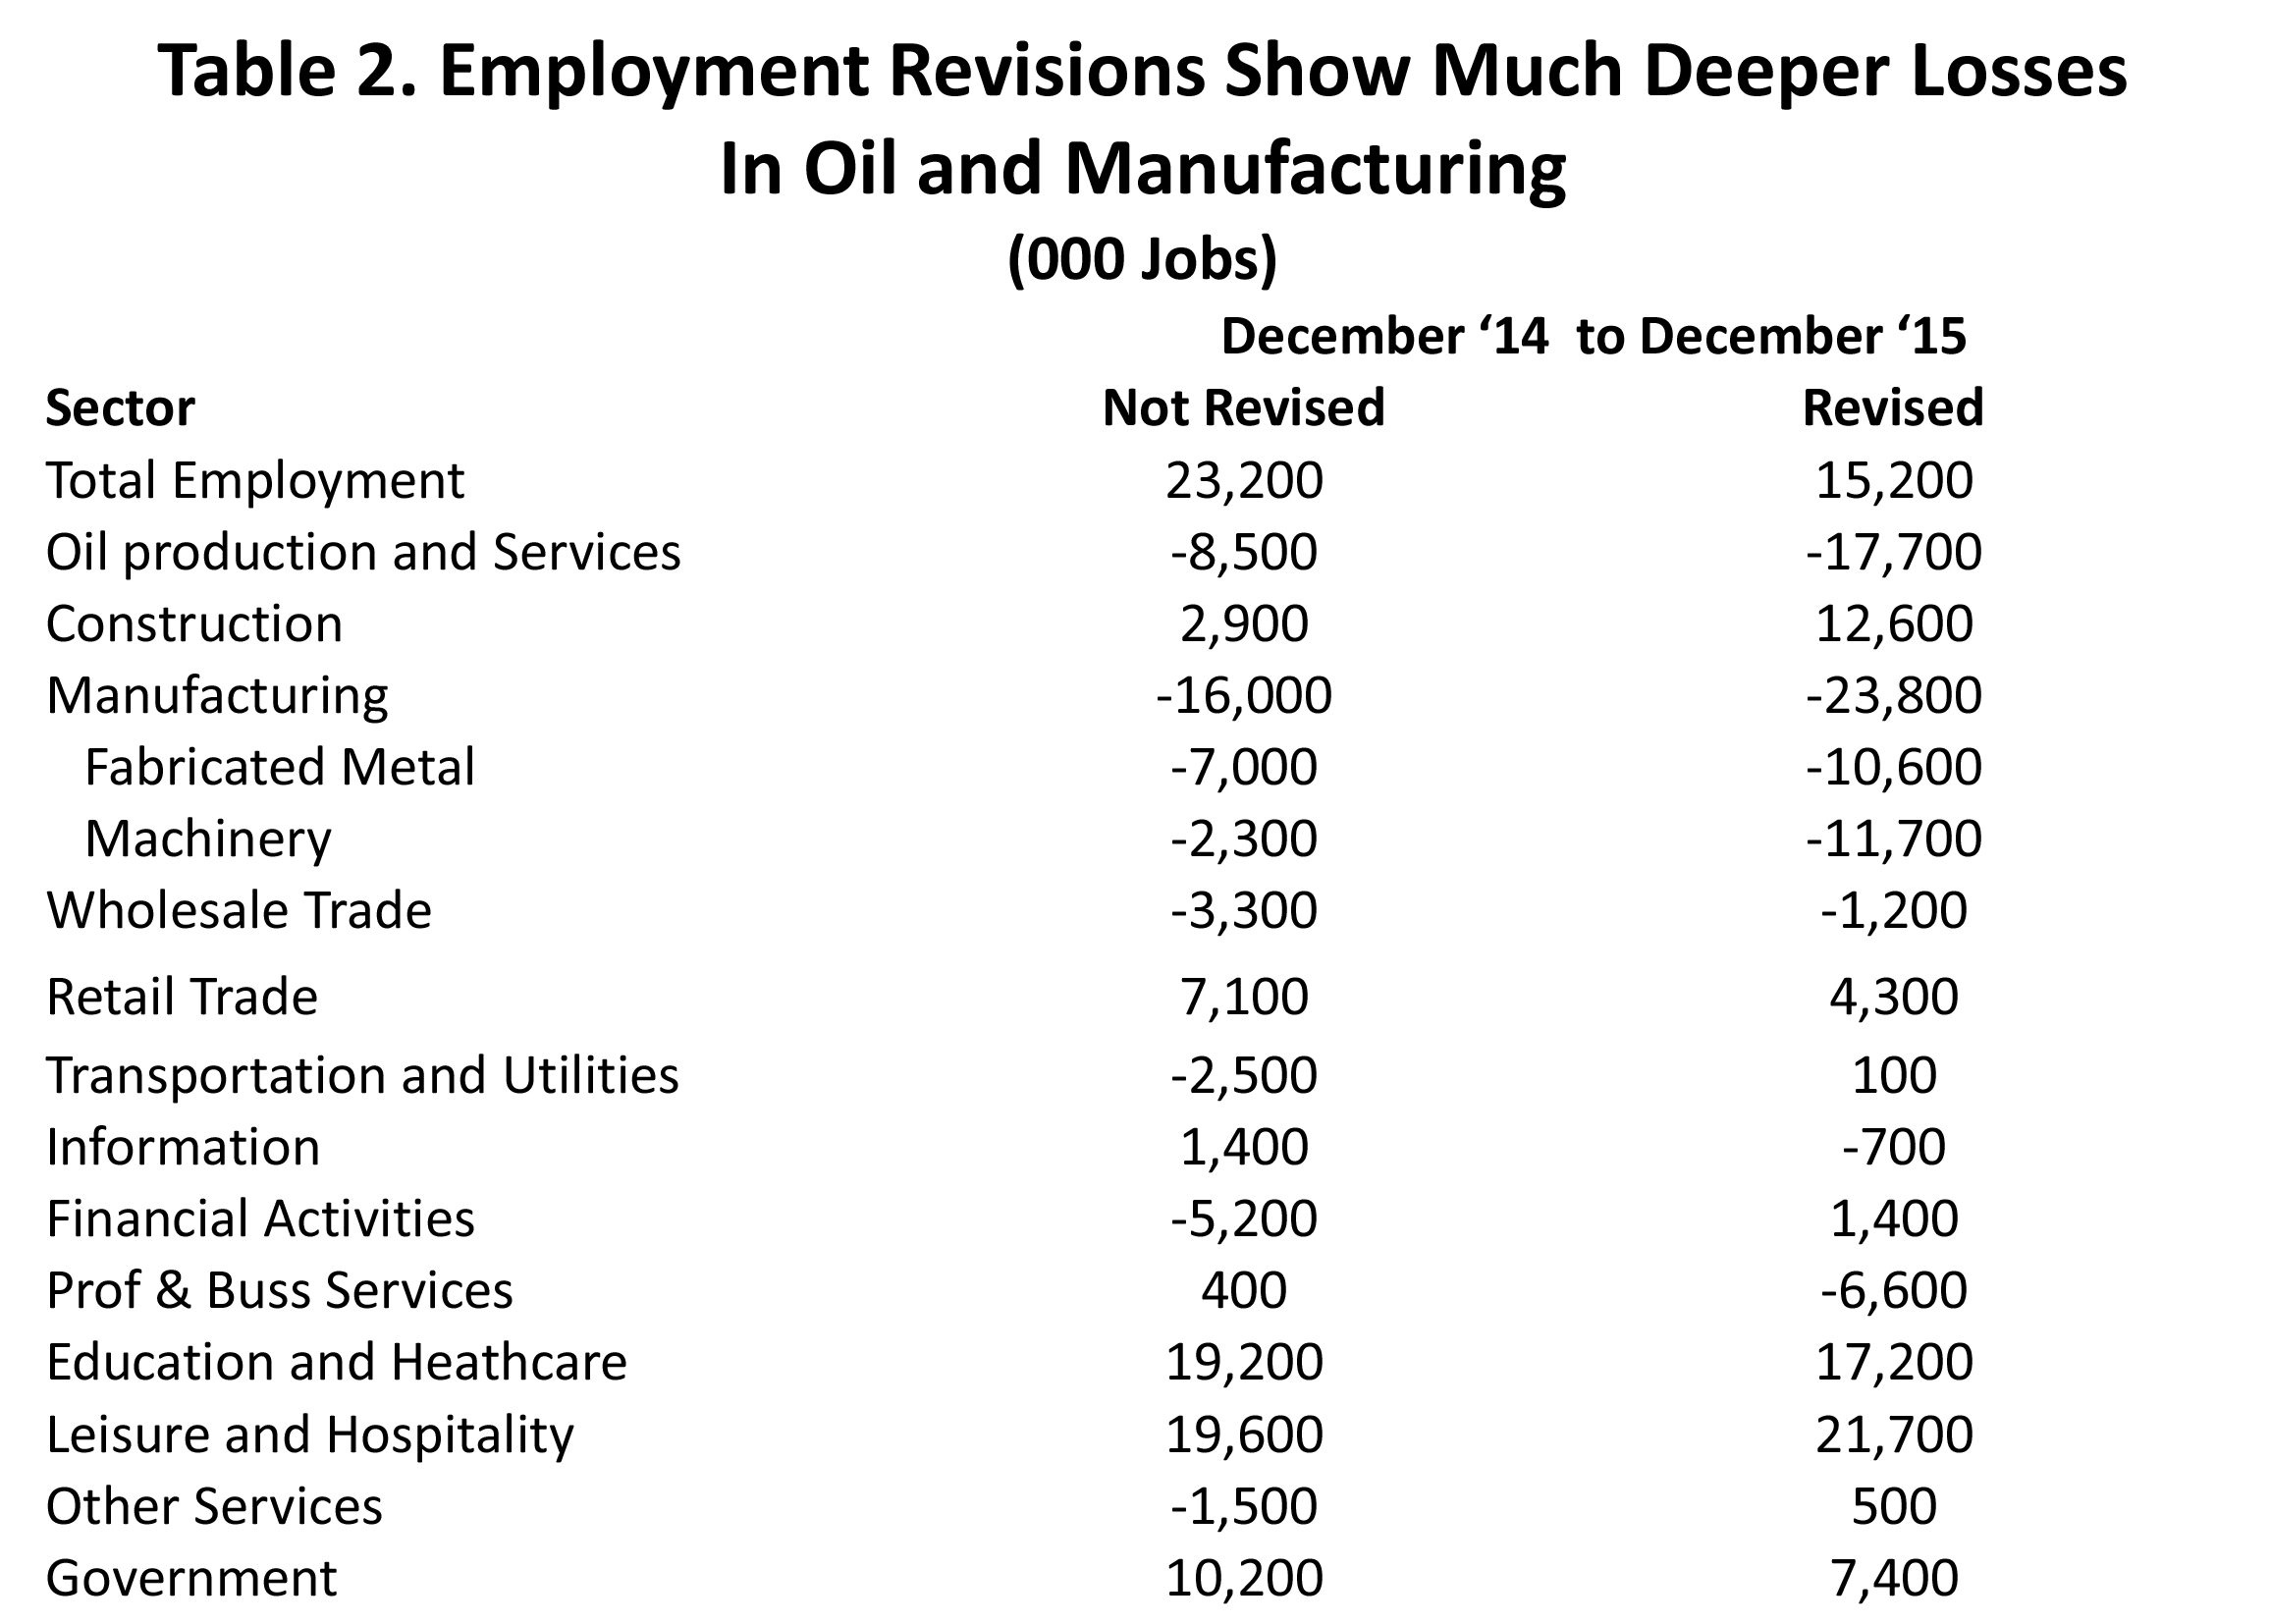 Table 2. Employment Revisions Show Much Deeper Losses in Oil and Manufacturing